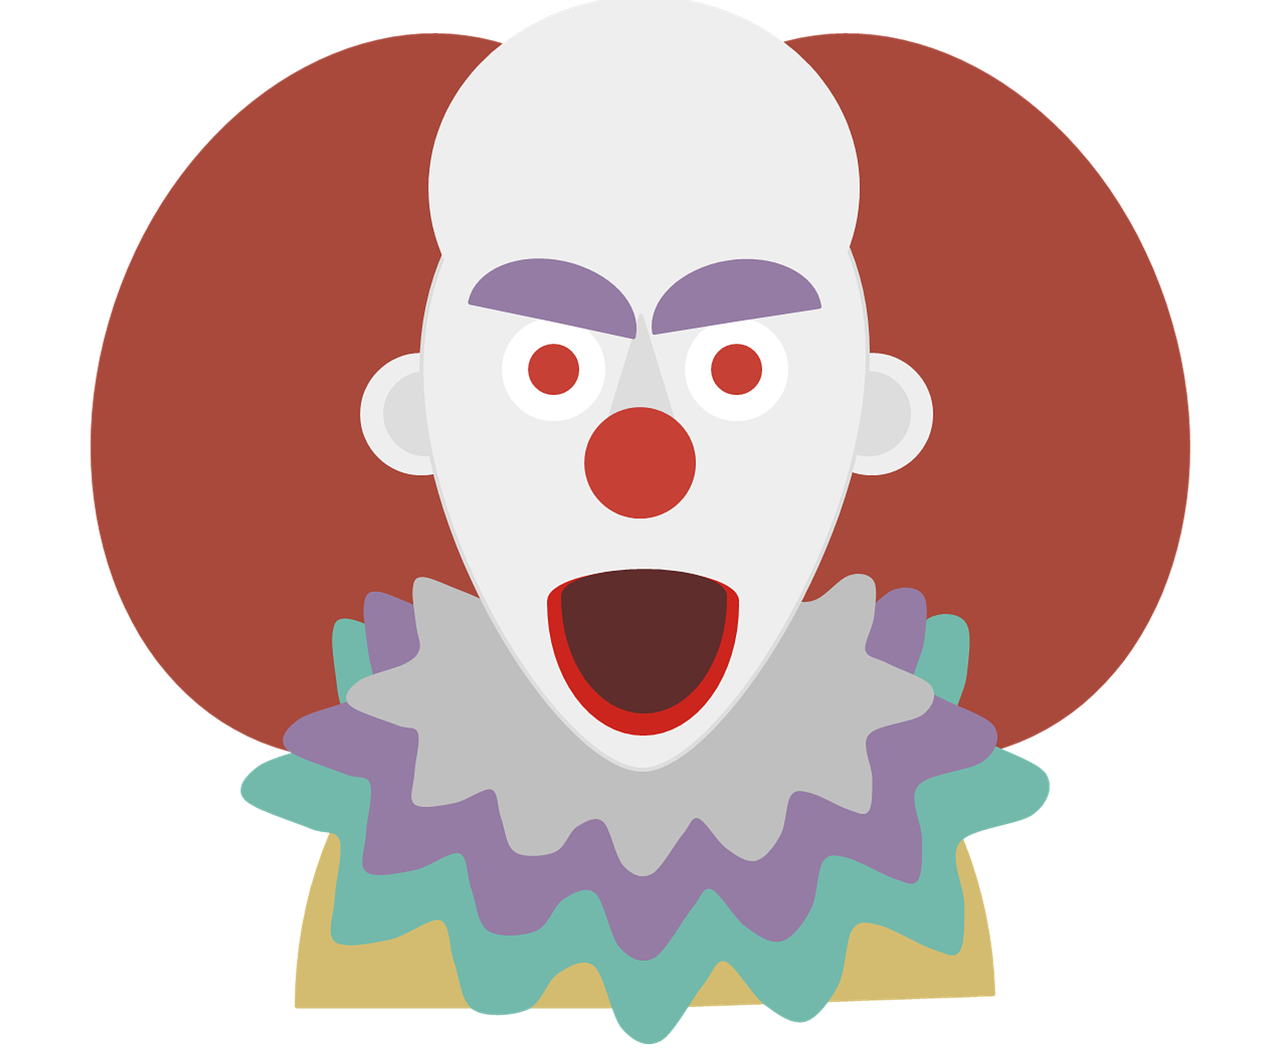 a clown with a surprised look on his face, inspired by Leo Leuppi, pixabay, mingei, symmetrical portrait rpg avatar, discord emoji, stephen king as pennywise, portrait of bald